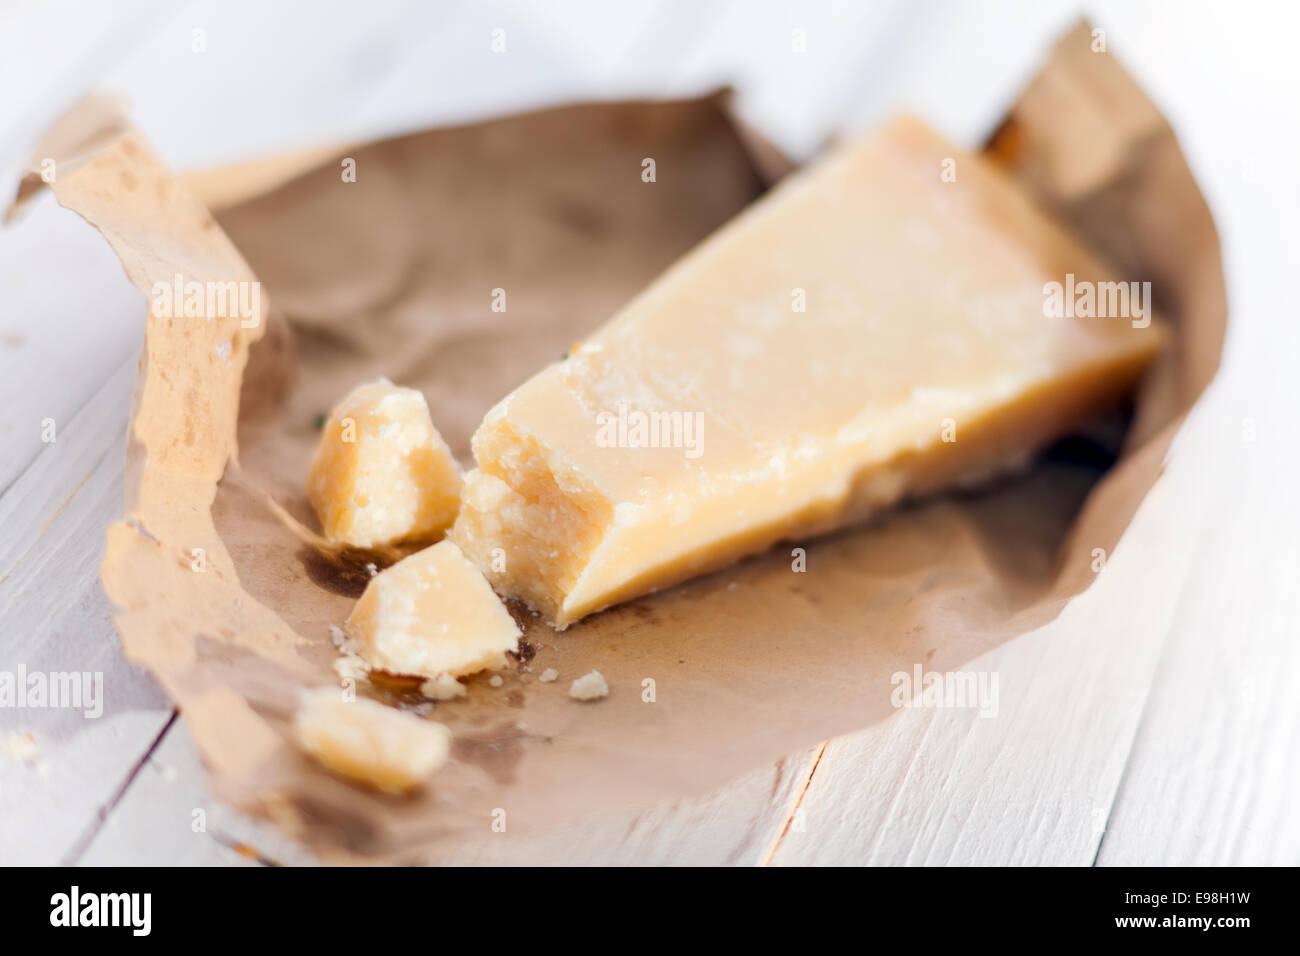 Wedge of fresh matured Italian Parmesan cheese or Parmigiano-Reggiano in a torn brown paper wrapper on white boards for use in Mediterranean cuisine Stock Photo